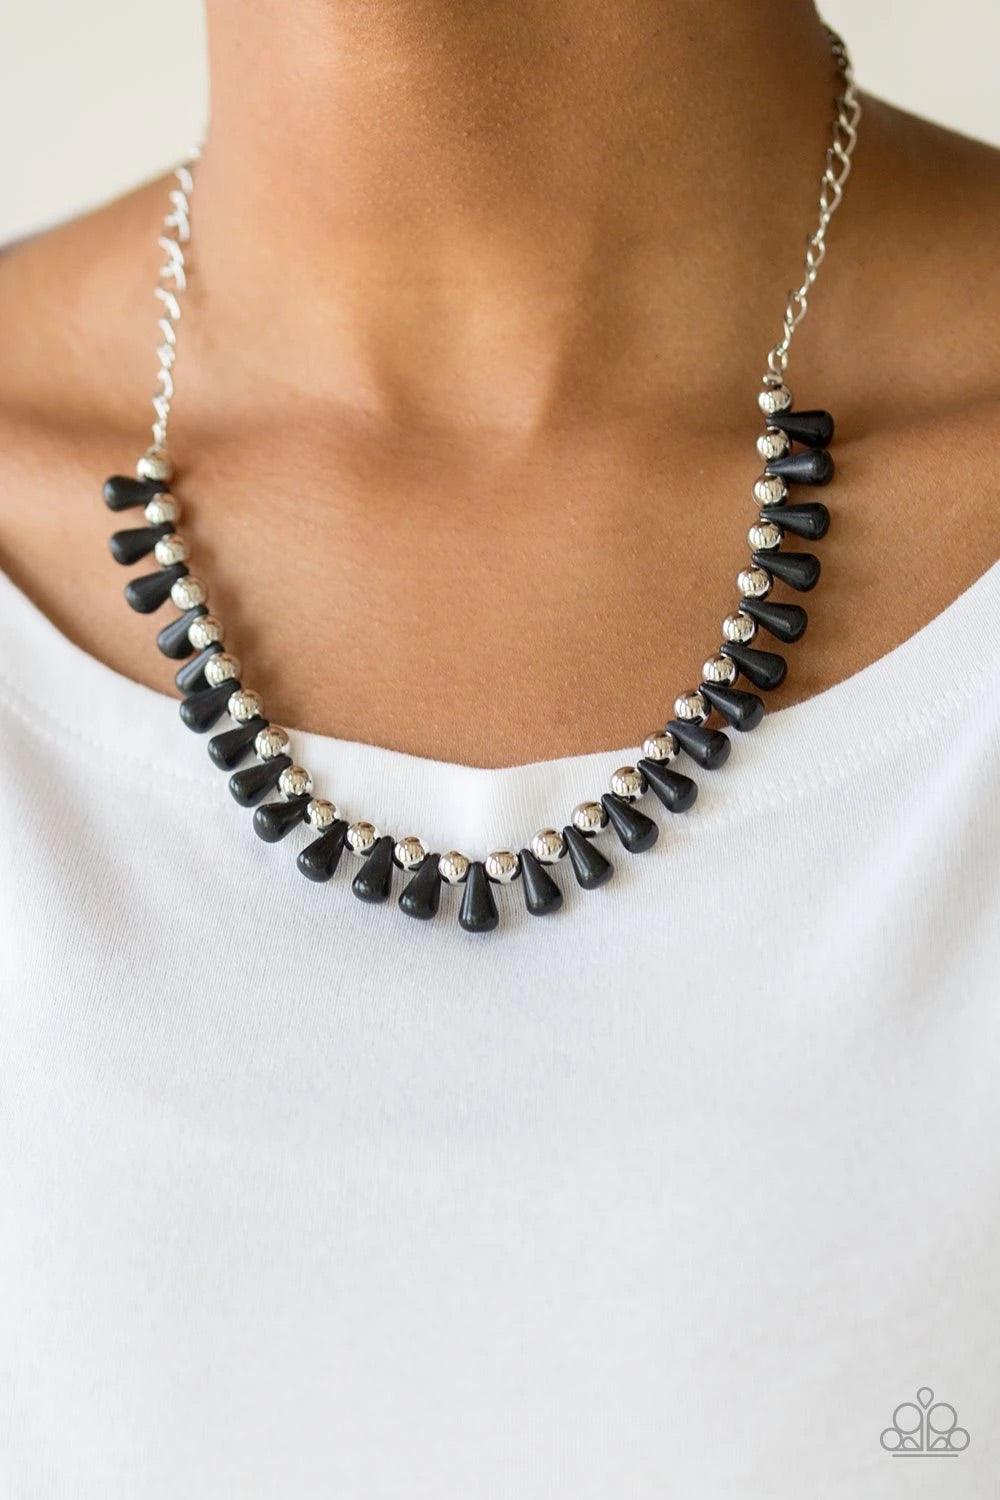 Paparazzi Accessories Extinct Species - Black Black teardrop stones and classic silver beads are threaded along an invisible wire. The earthy beads alternate below the collar, creating a wild fringe. Features an adjustable clasp closure. Sold as one indiv